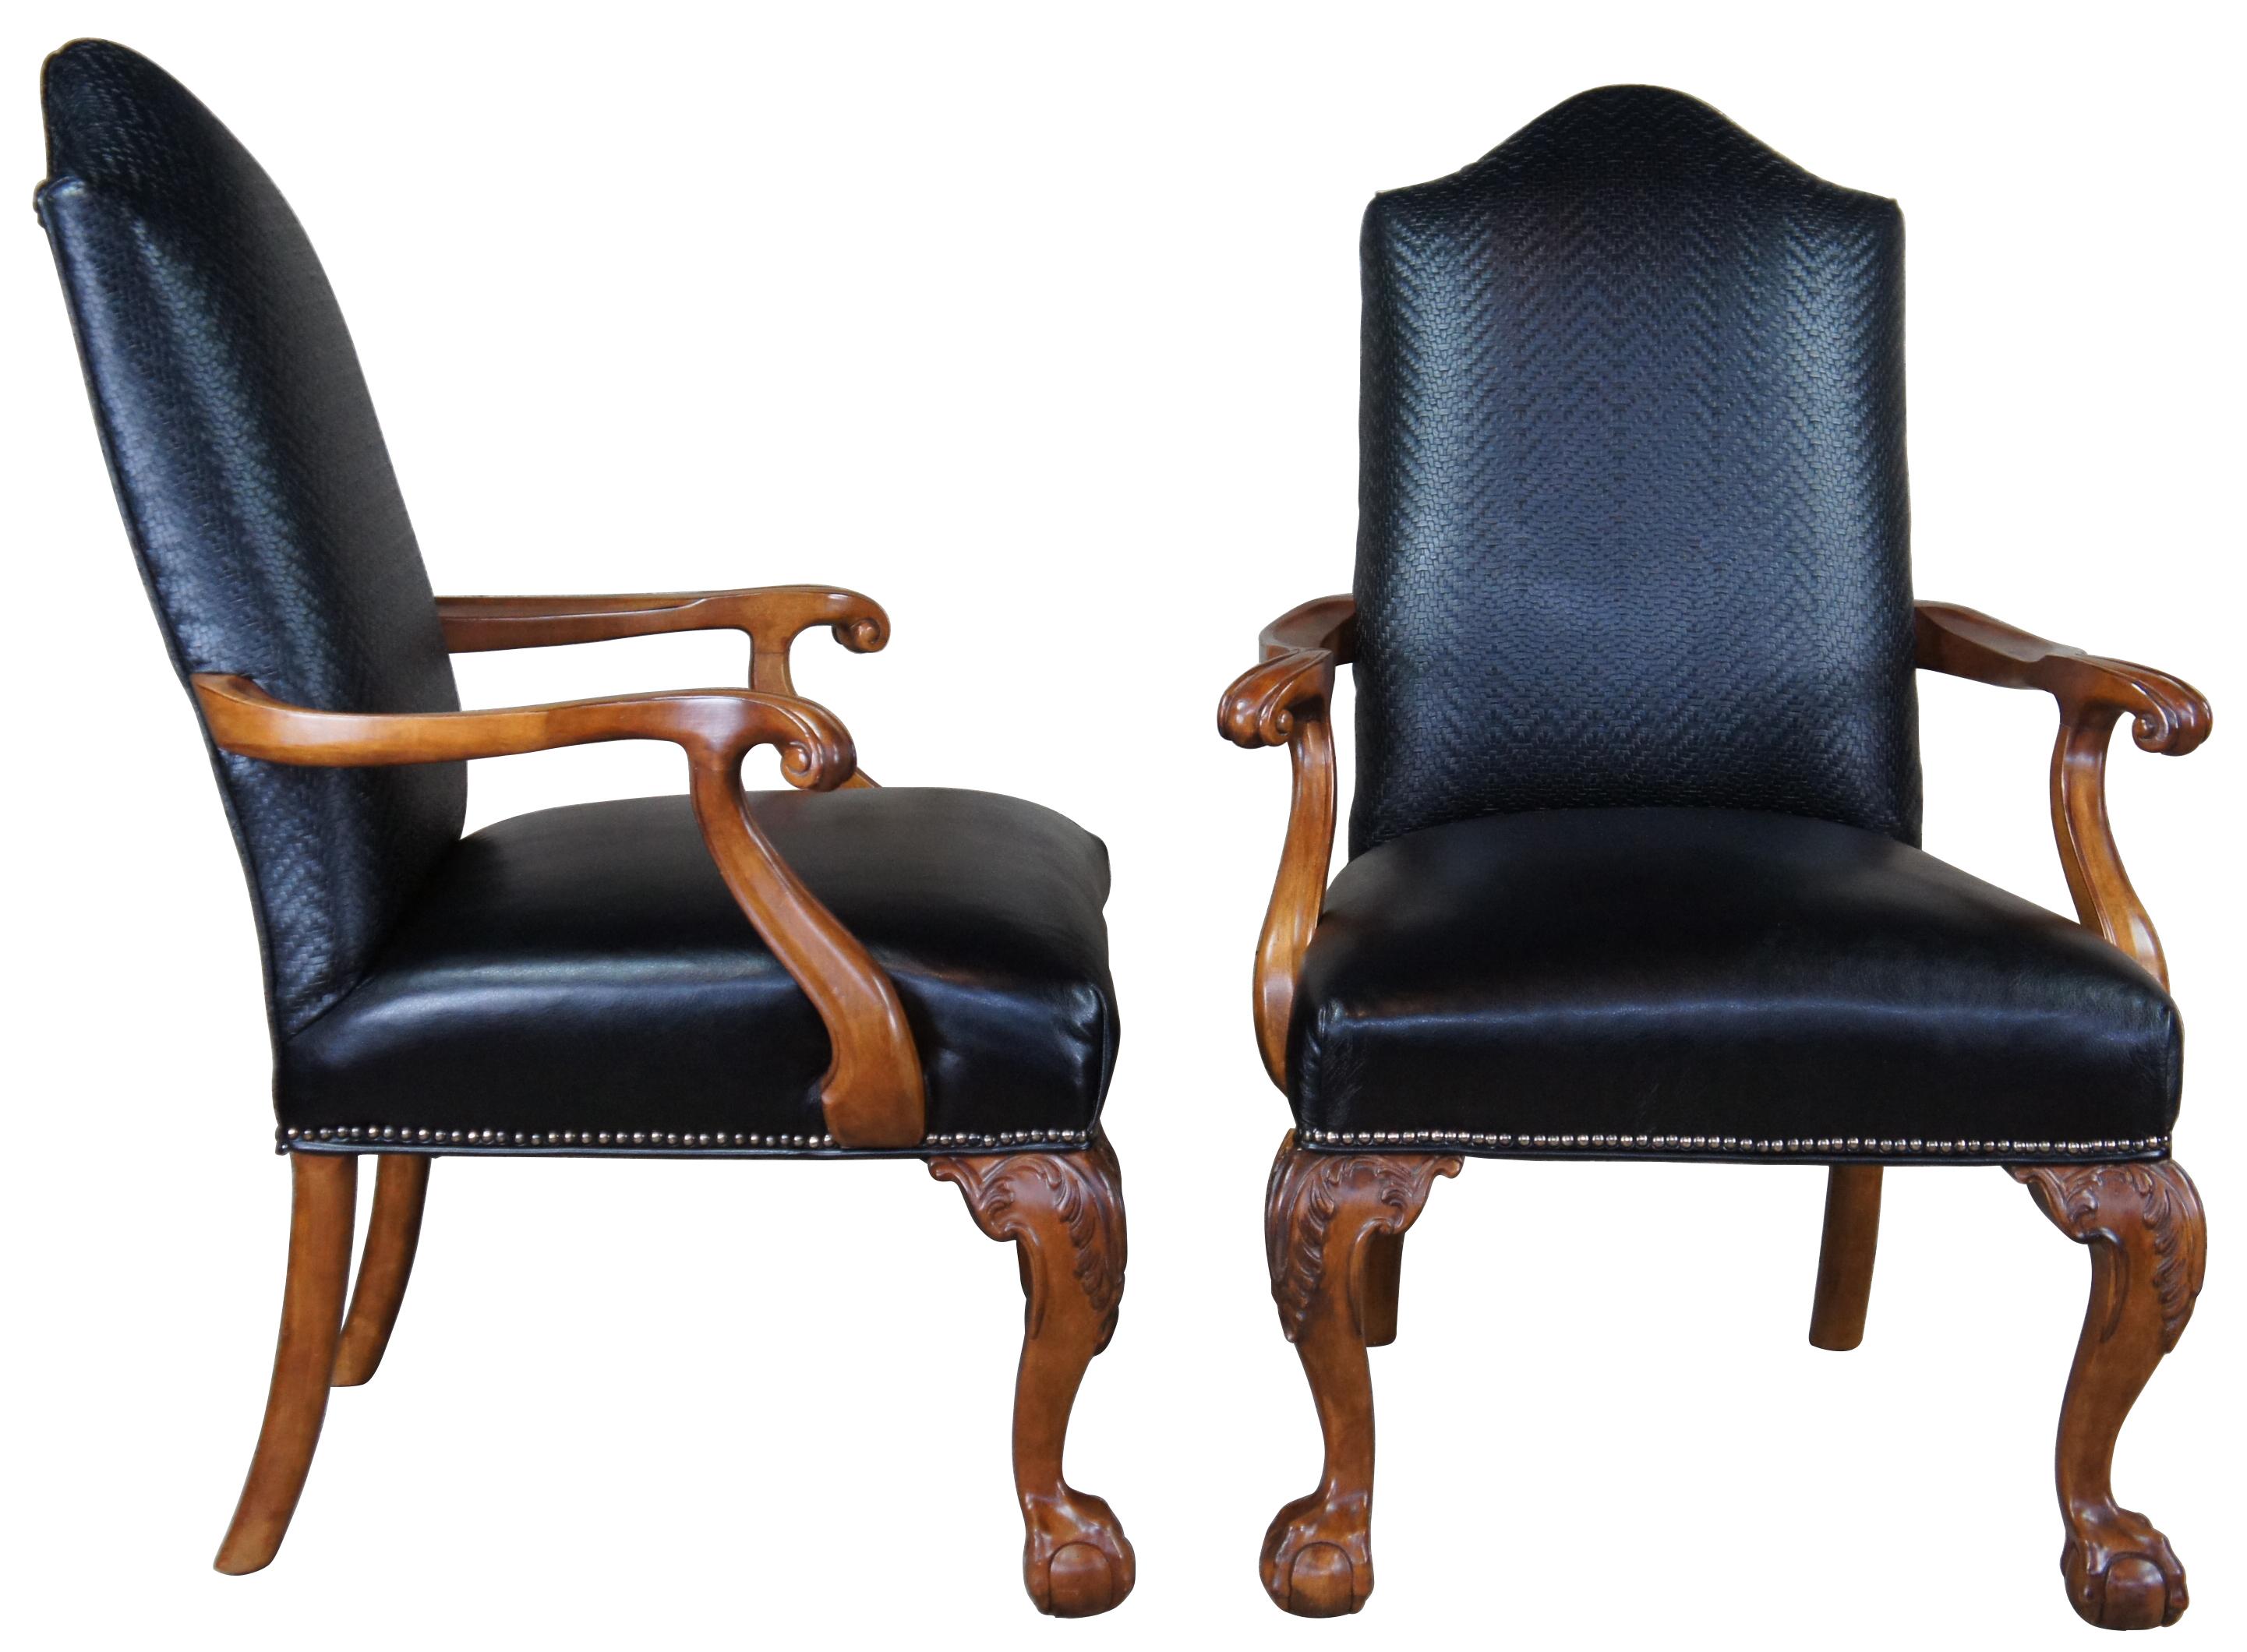 Set of two vintage Century Furniture arm chairs. Featuring ball and claw feet and upholstered in black leather with woven herringbone pattern and nailhead trim.
 